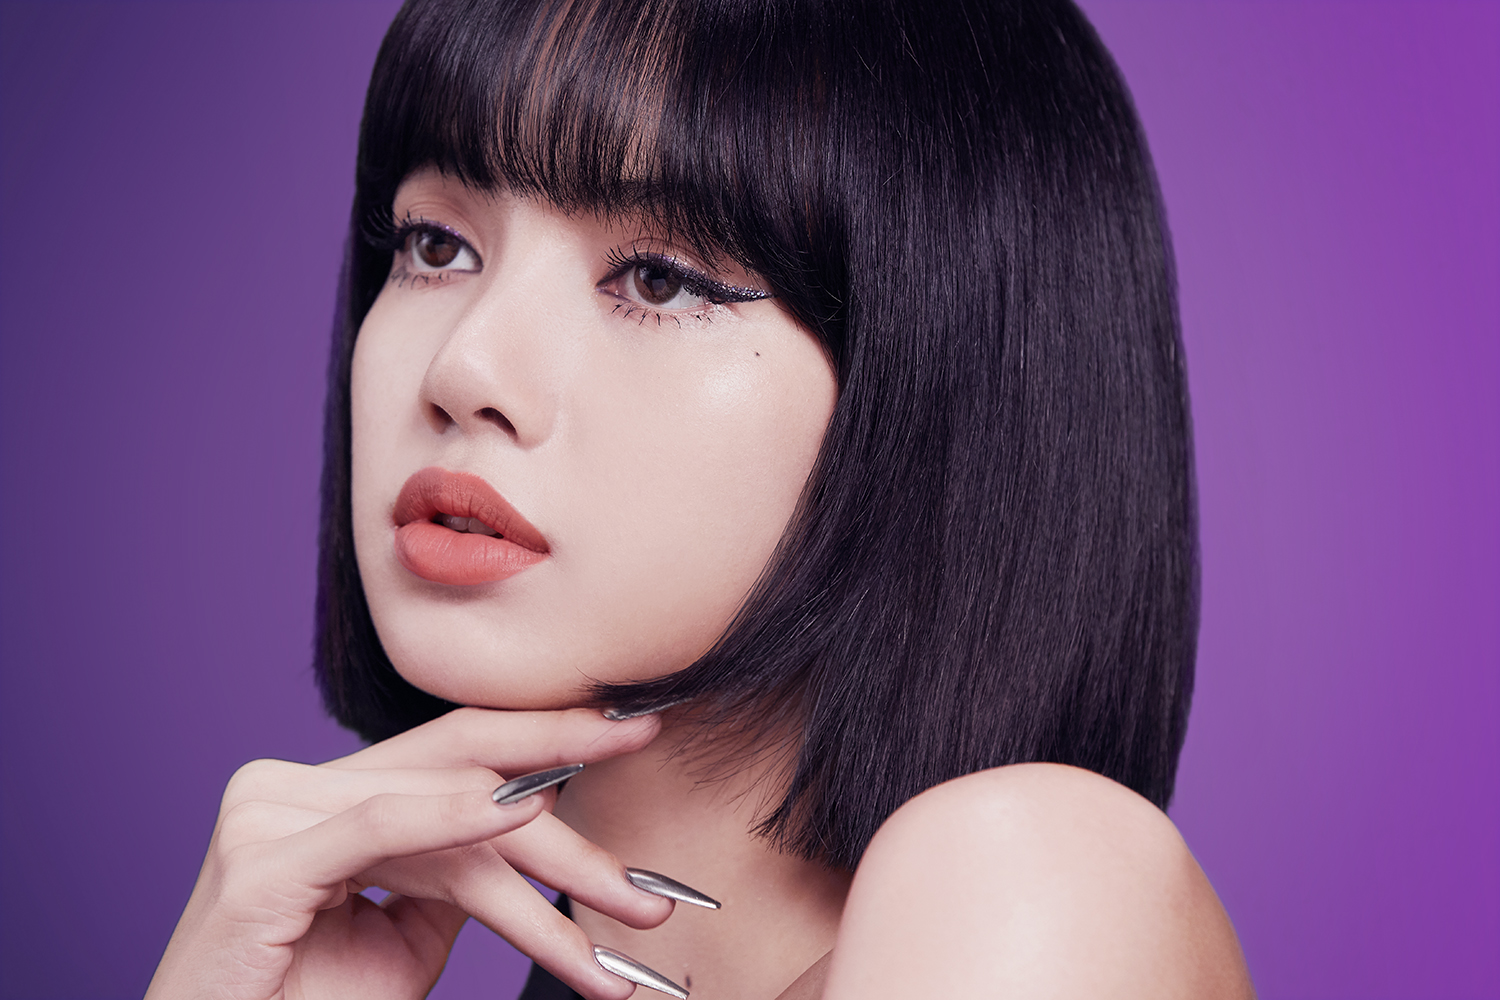 Lisa From BLACKPINK Is The New Global Face Of Mac Cosmetics